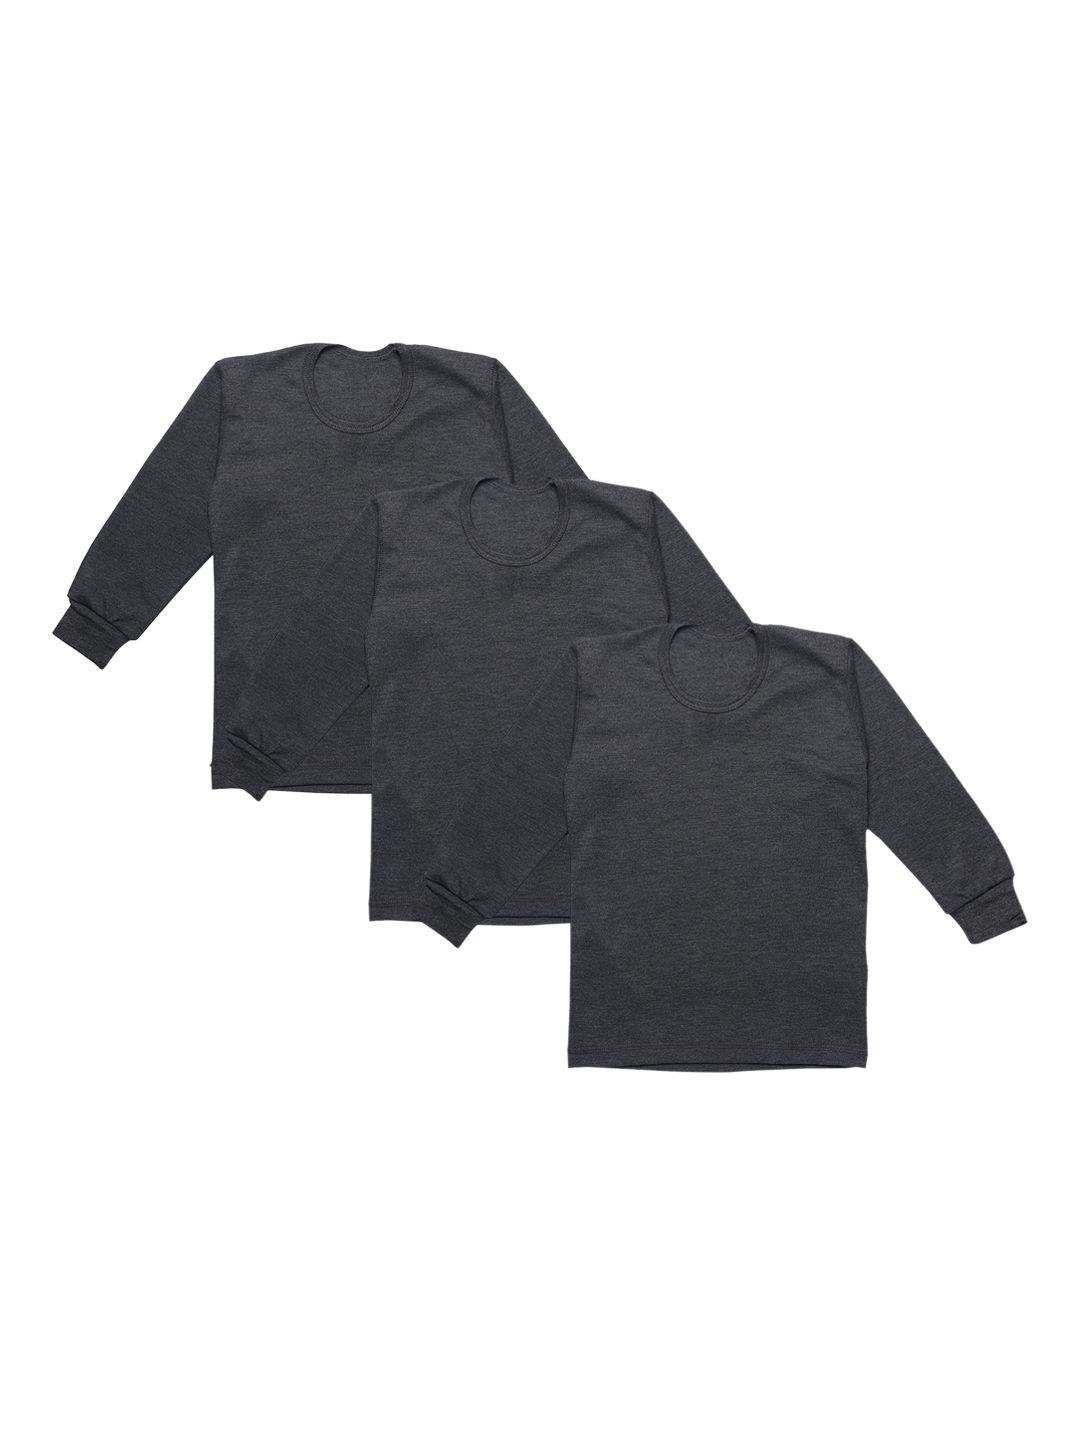 vimal jonney infant kids pack of 3 solid cotton thermal tops